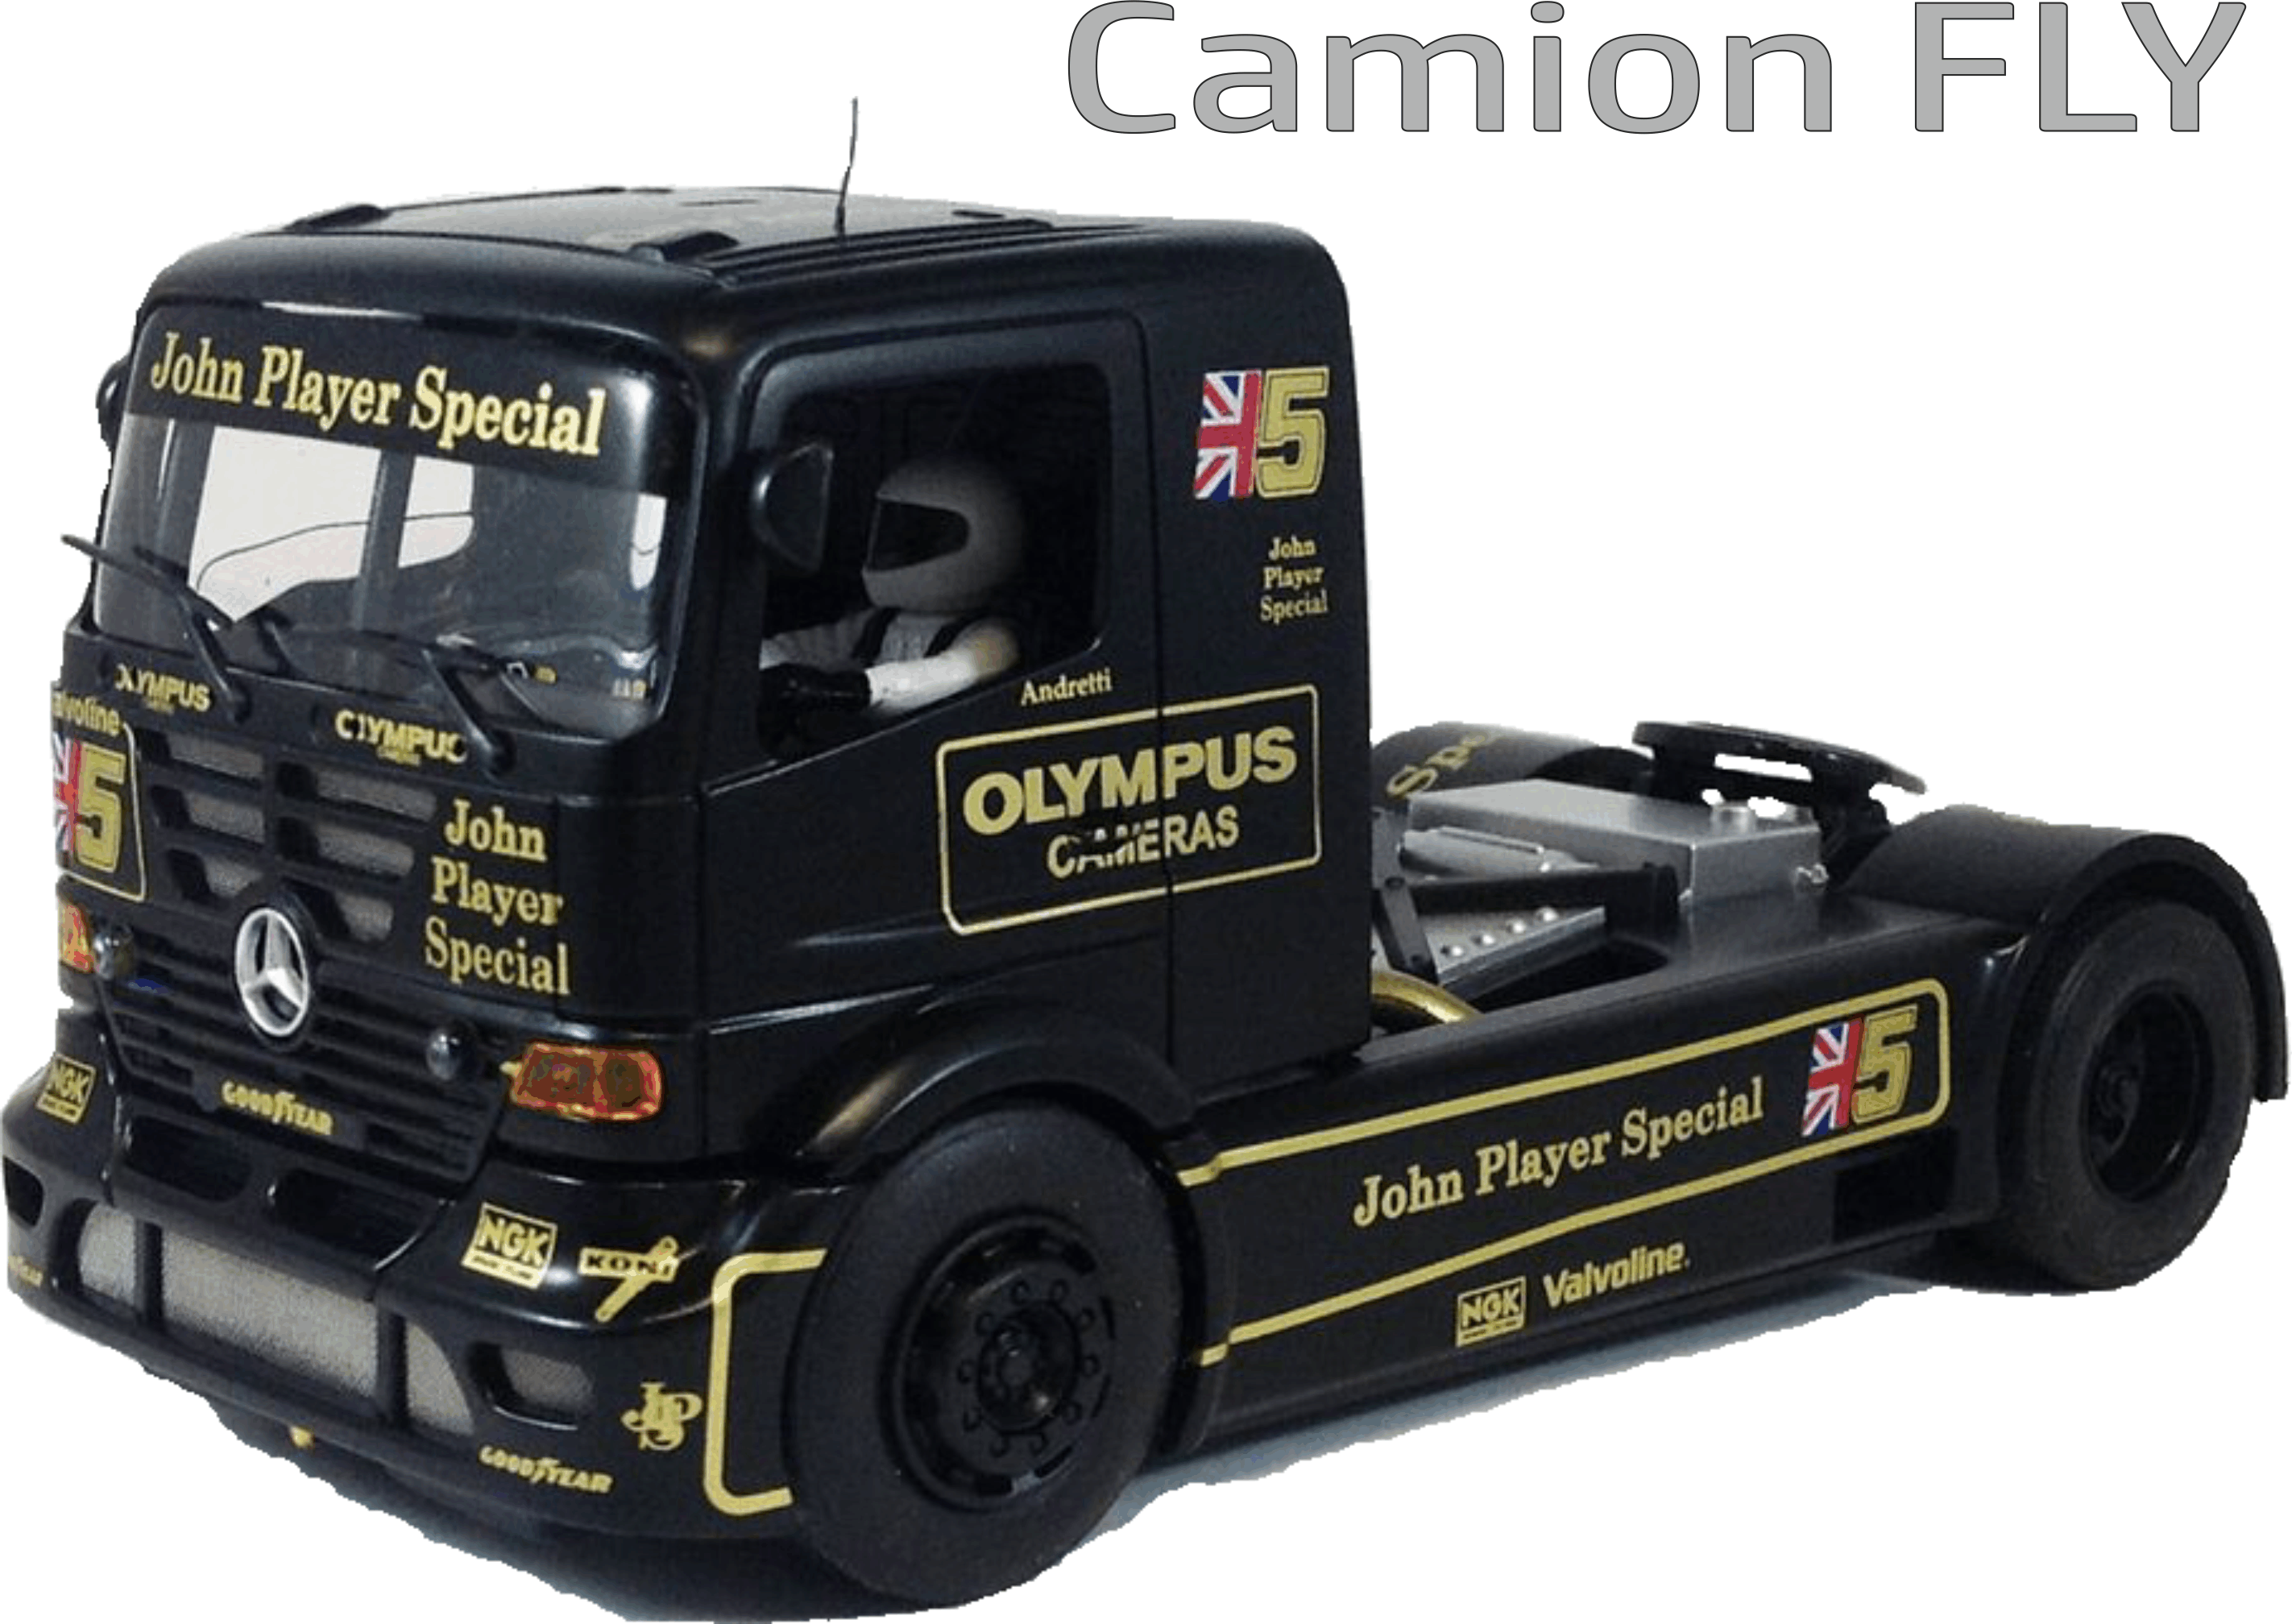 2019 FLY CAMION